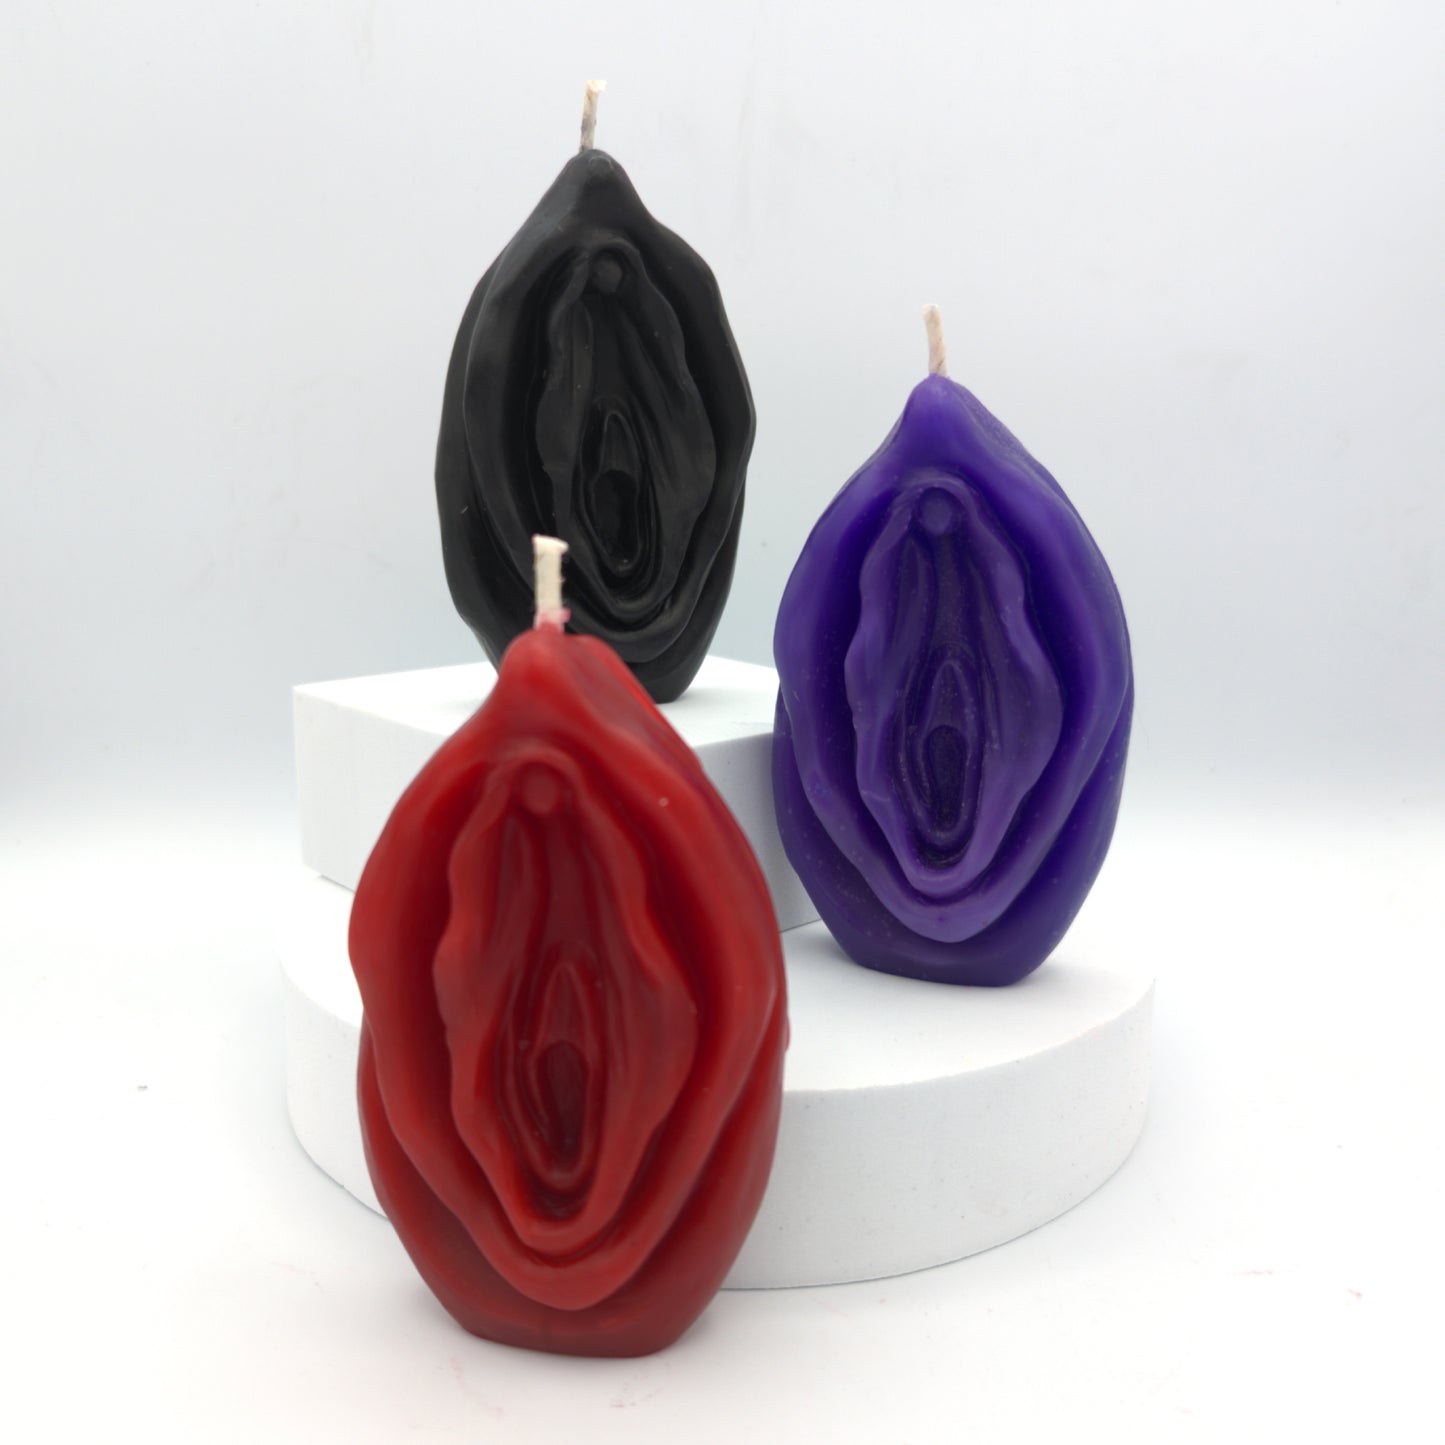 Fiery Vulvas - Wax Play Vulva Candle - Vagina Candle - Cunt Candle